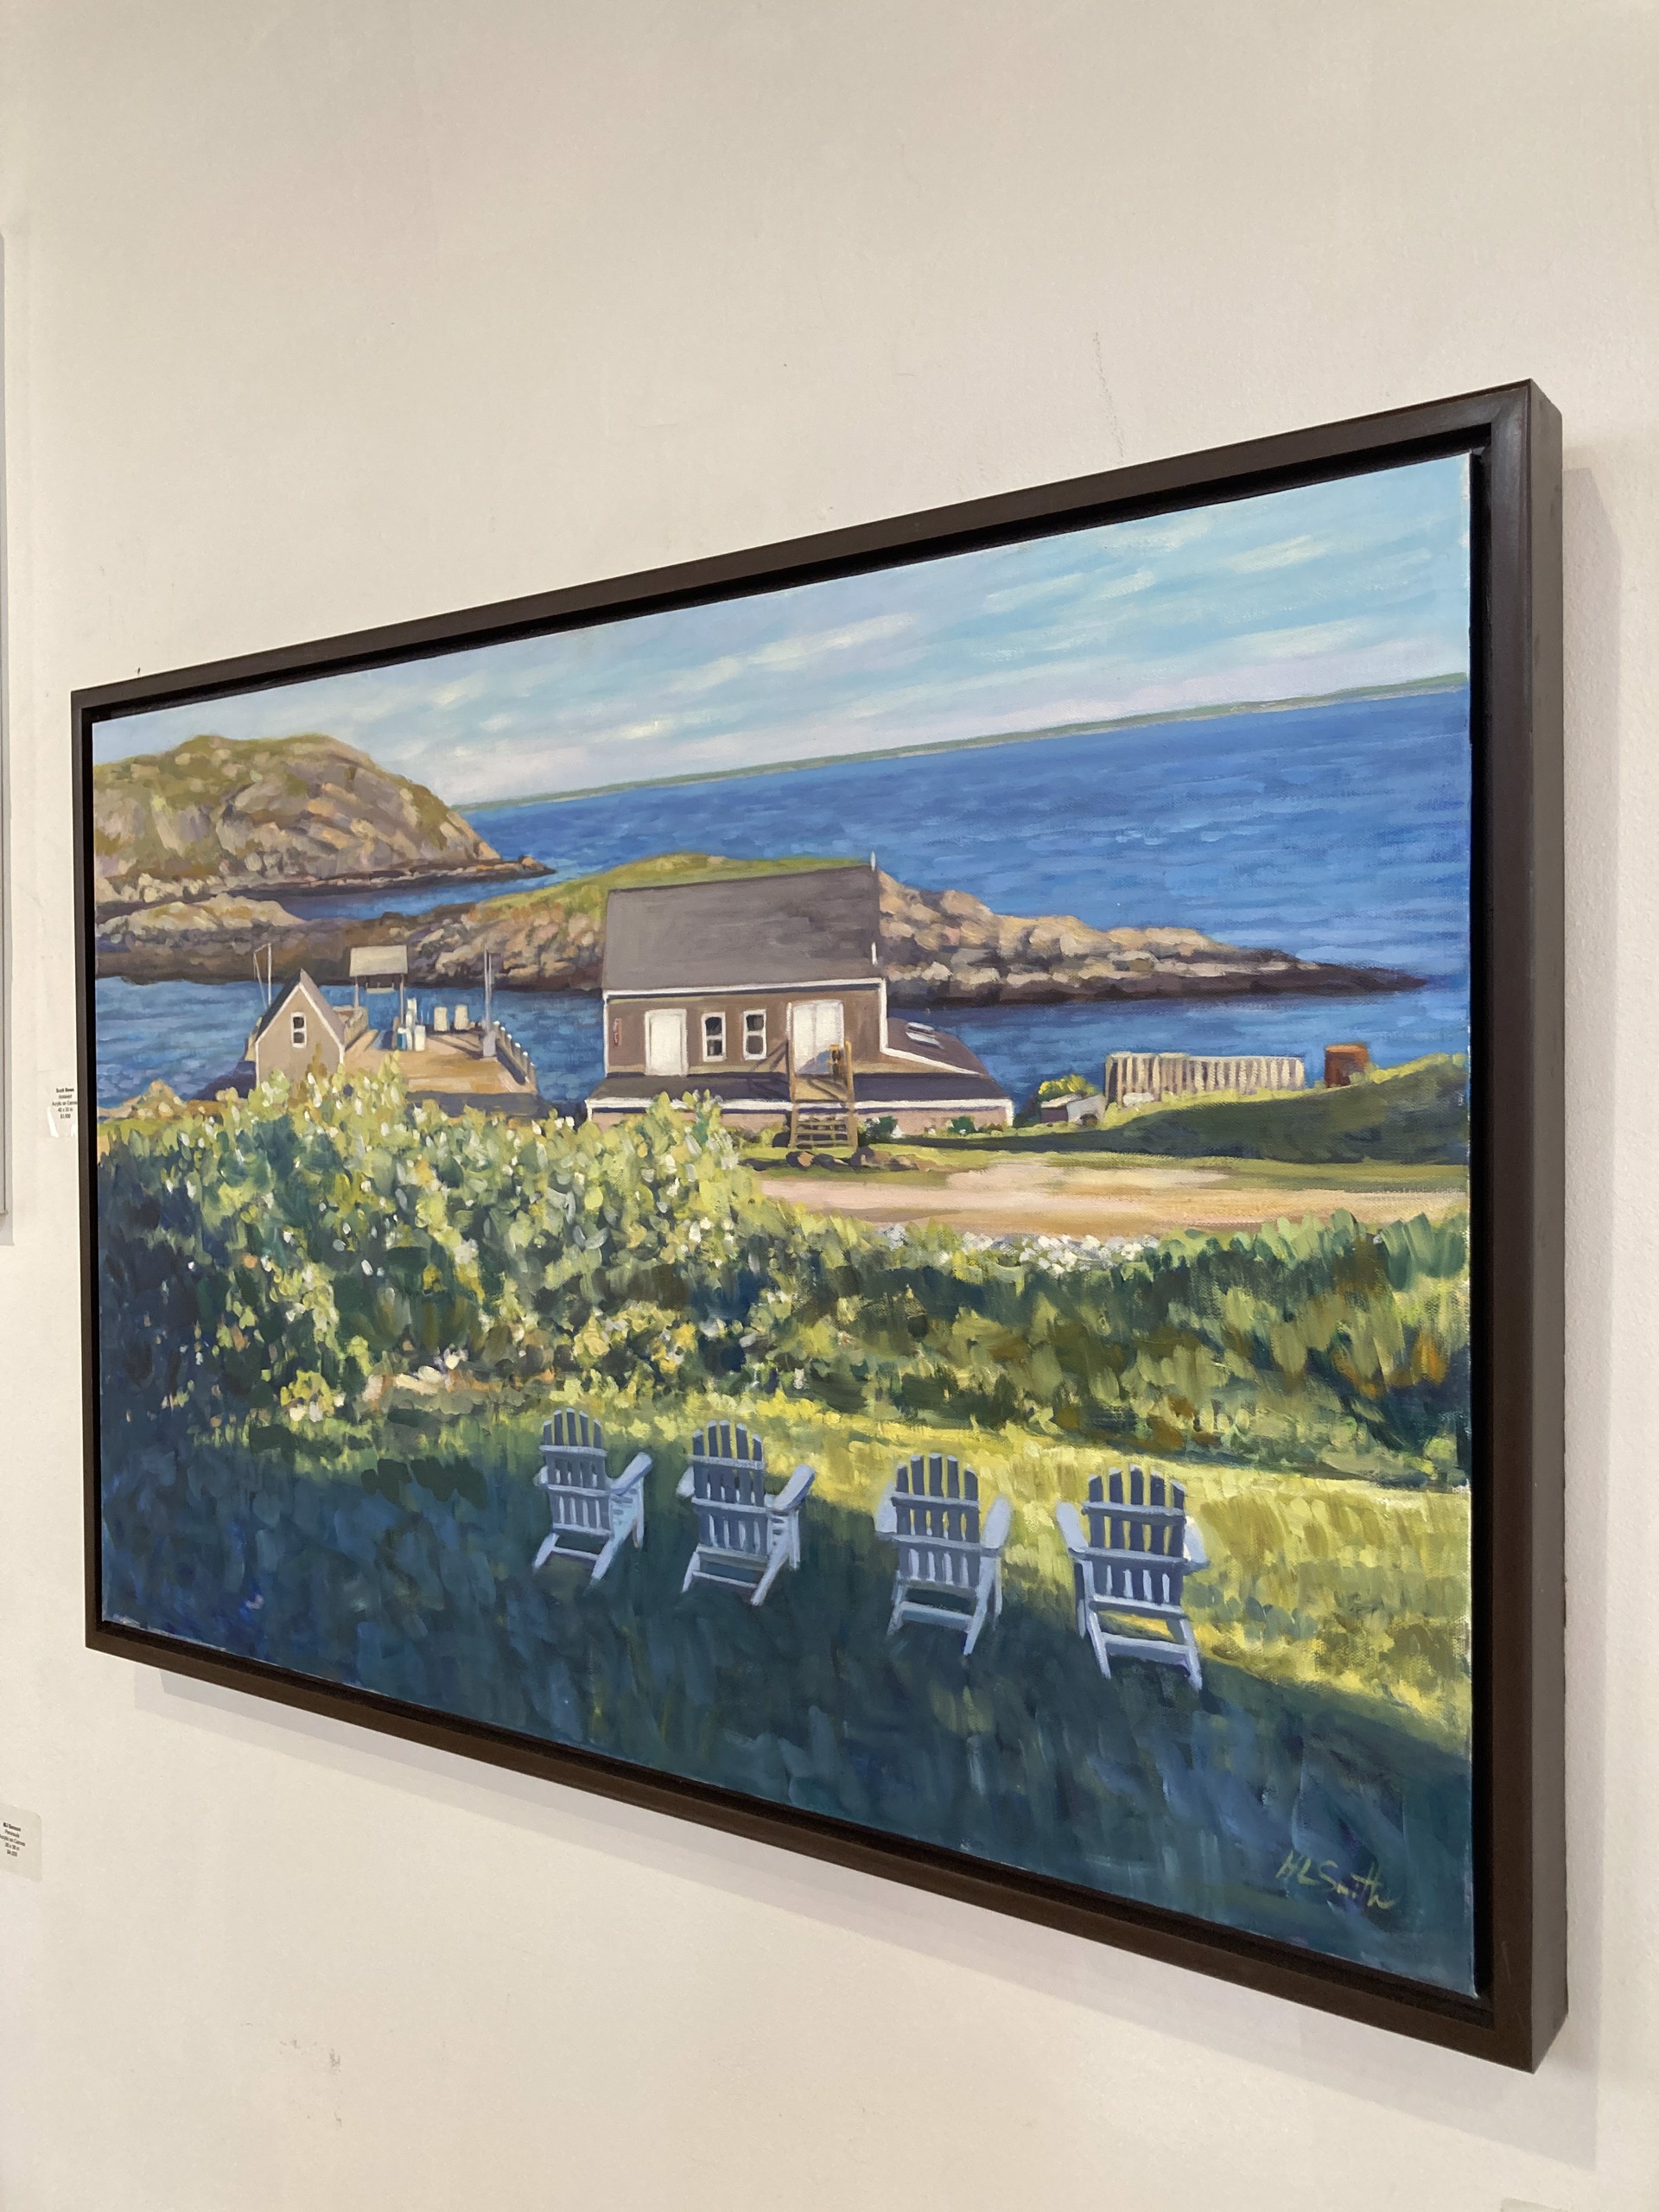 A Quiet Morning on Monhegan Island by Holly L. Smith